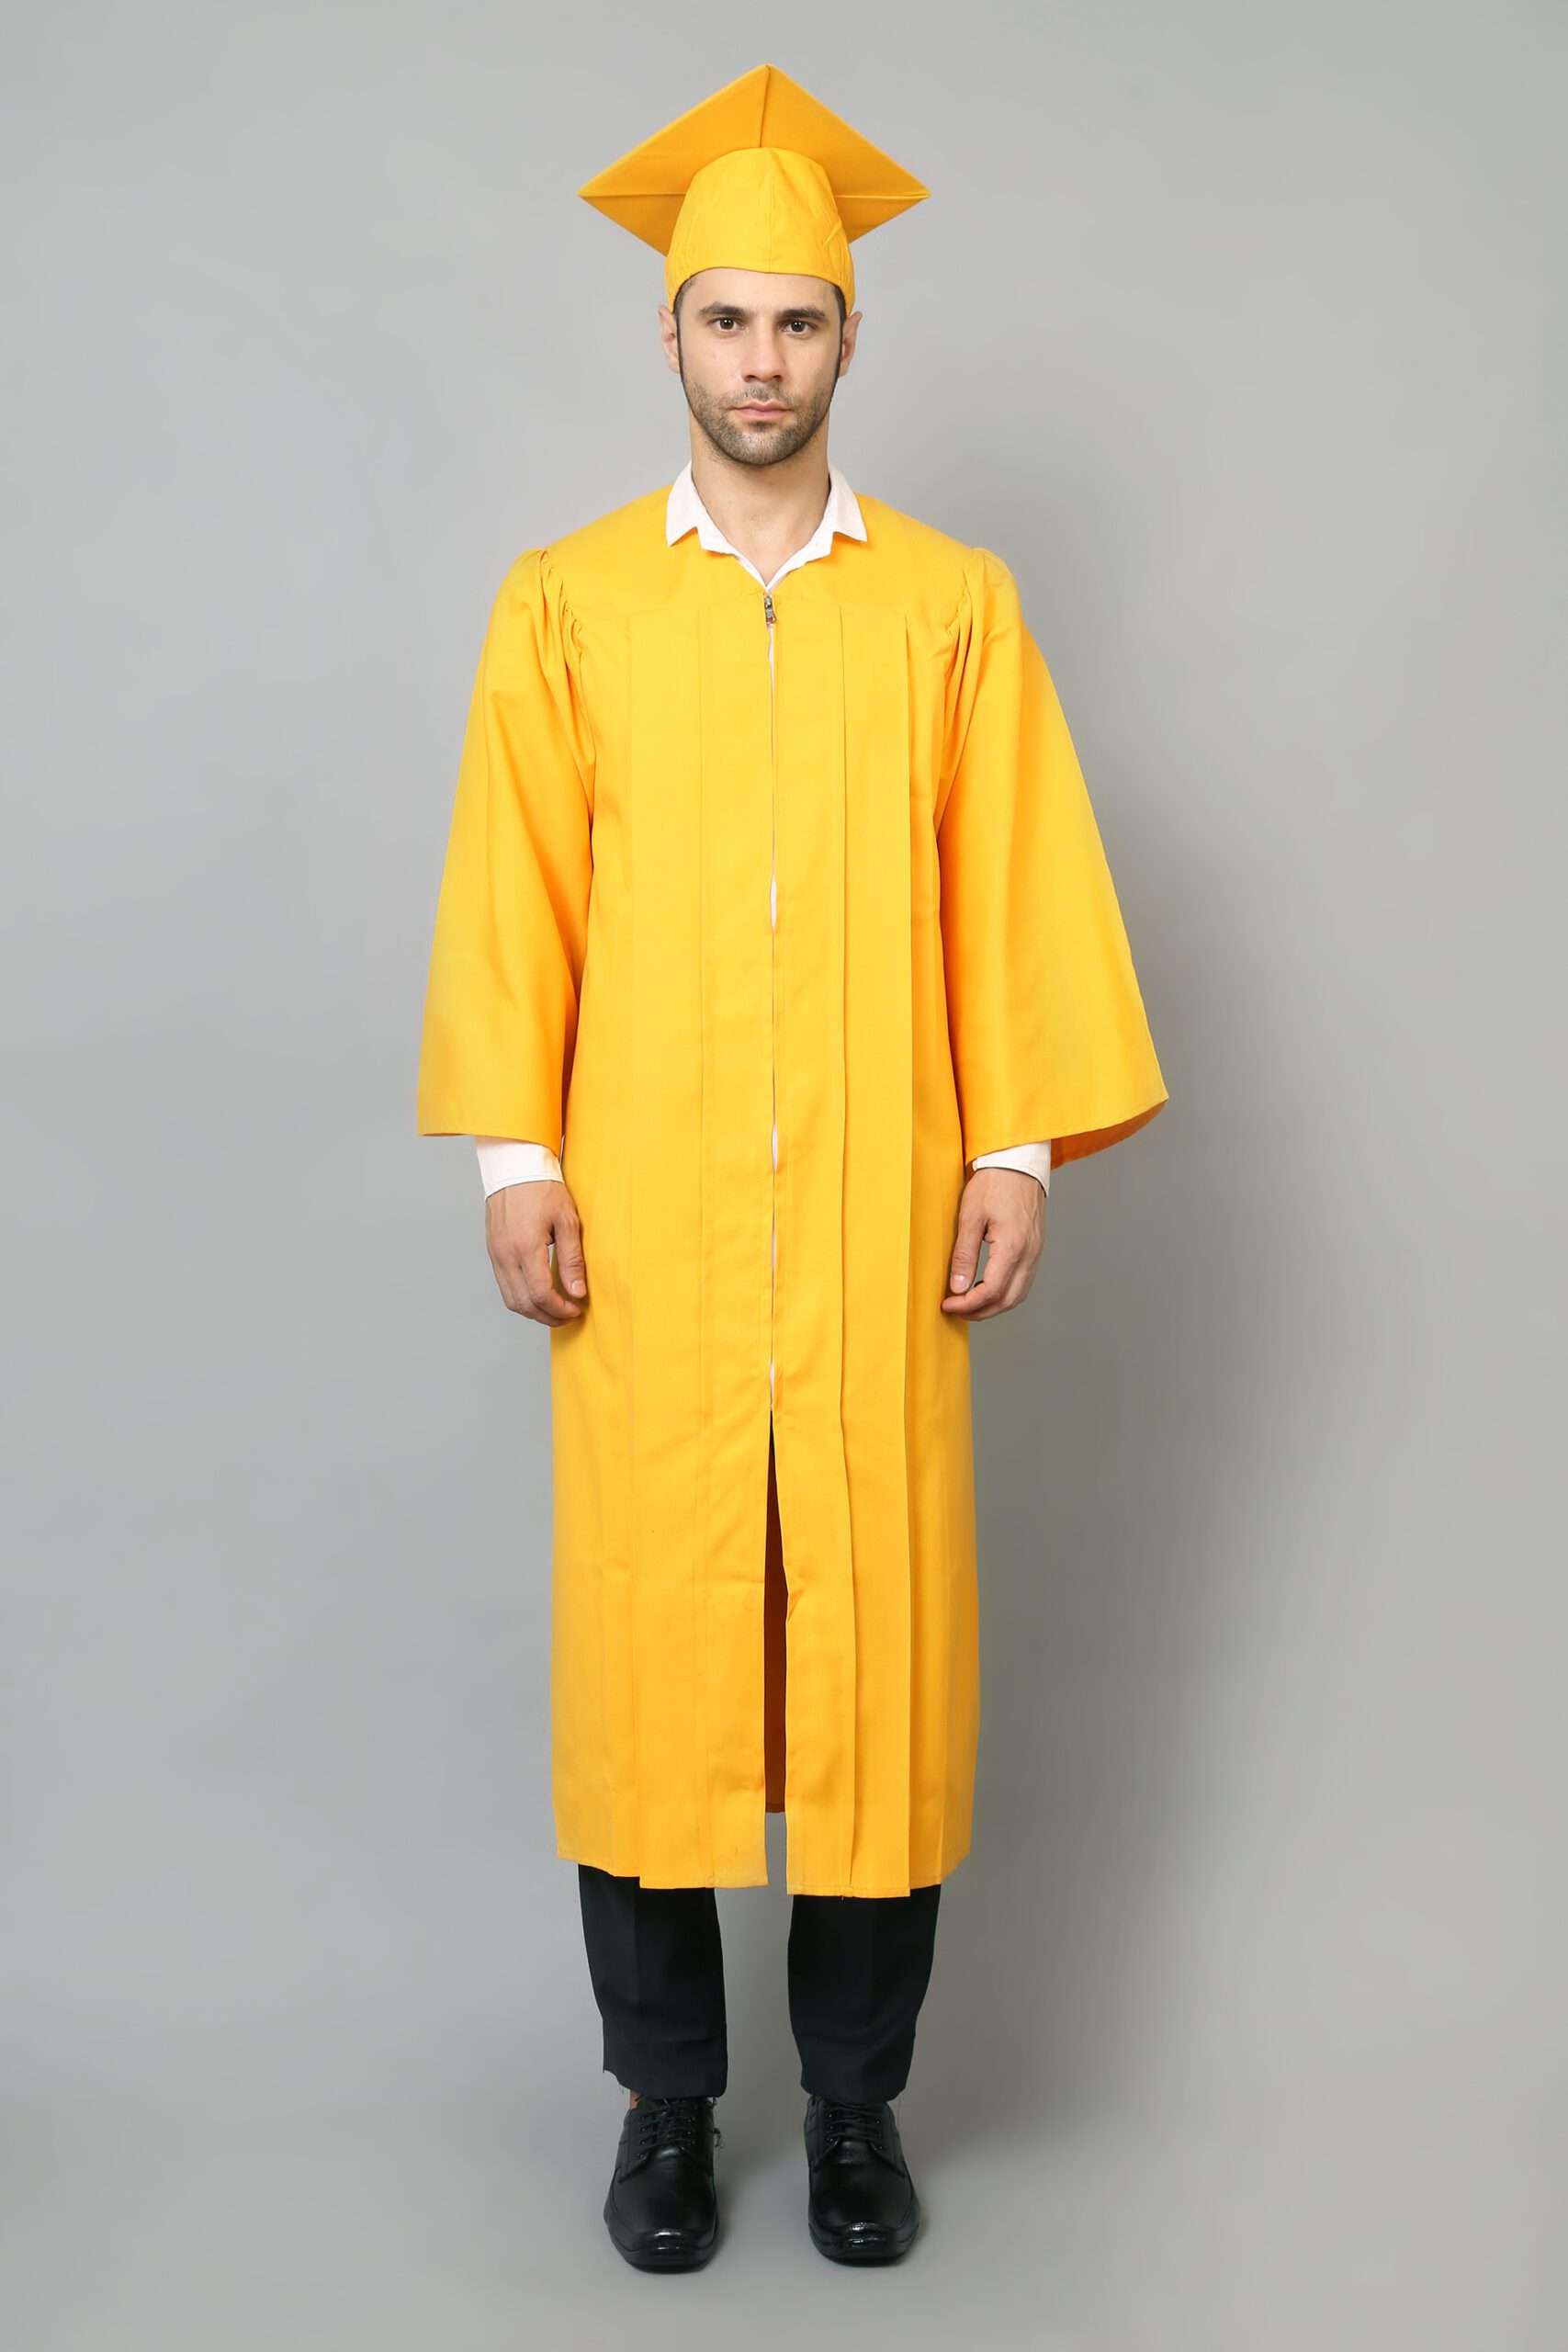 Satin Yellow Graduation Gown at Rs 350/piece in Hyderabad | ID:  2852983246348